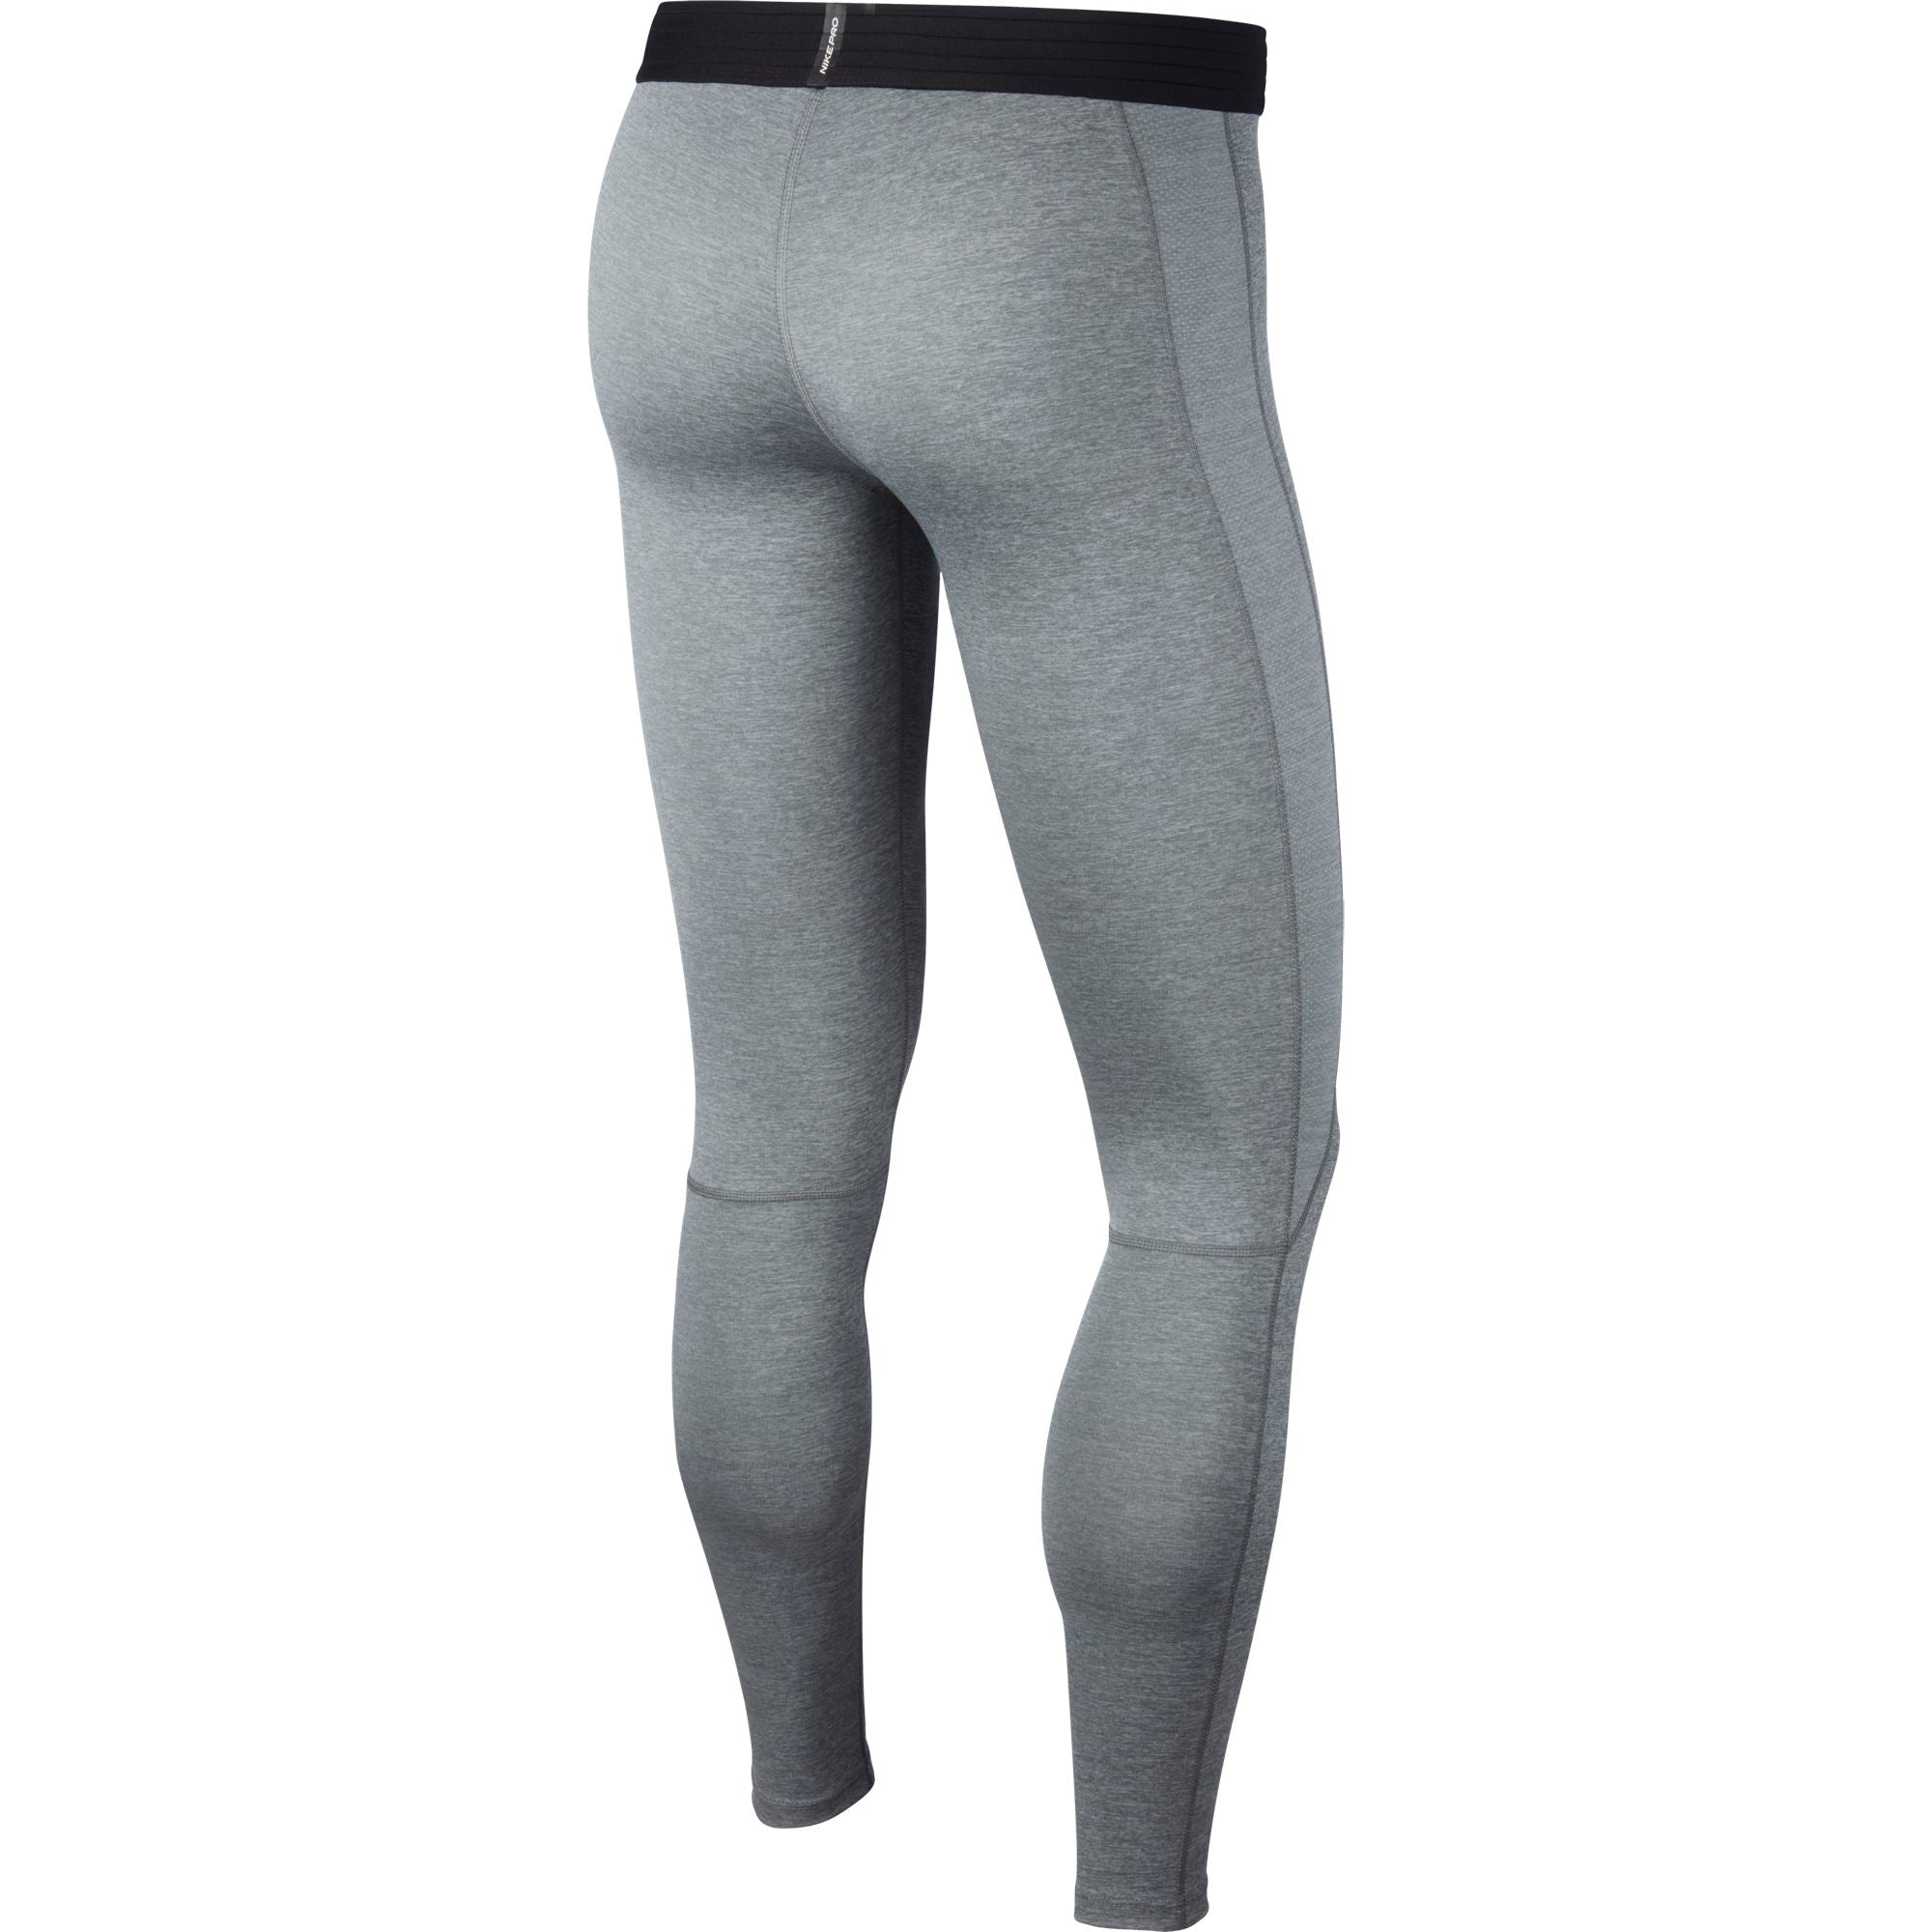 Nike Pro Training Bv5641 Tights Men's Size S Gray - for sale online